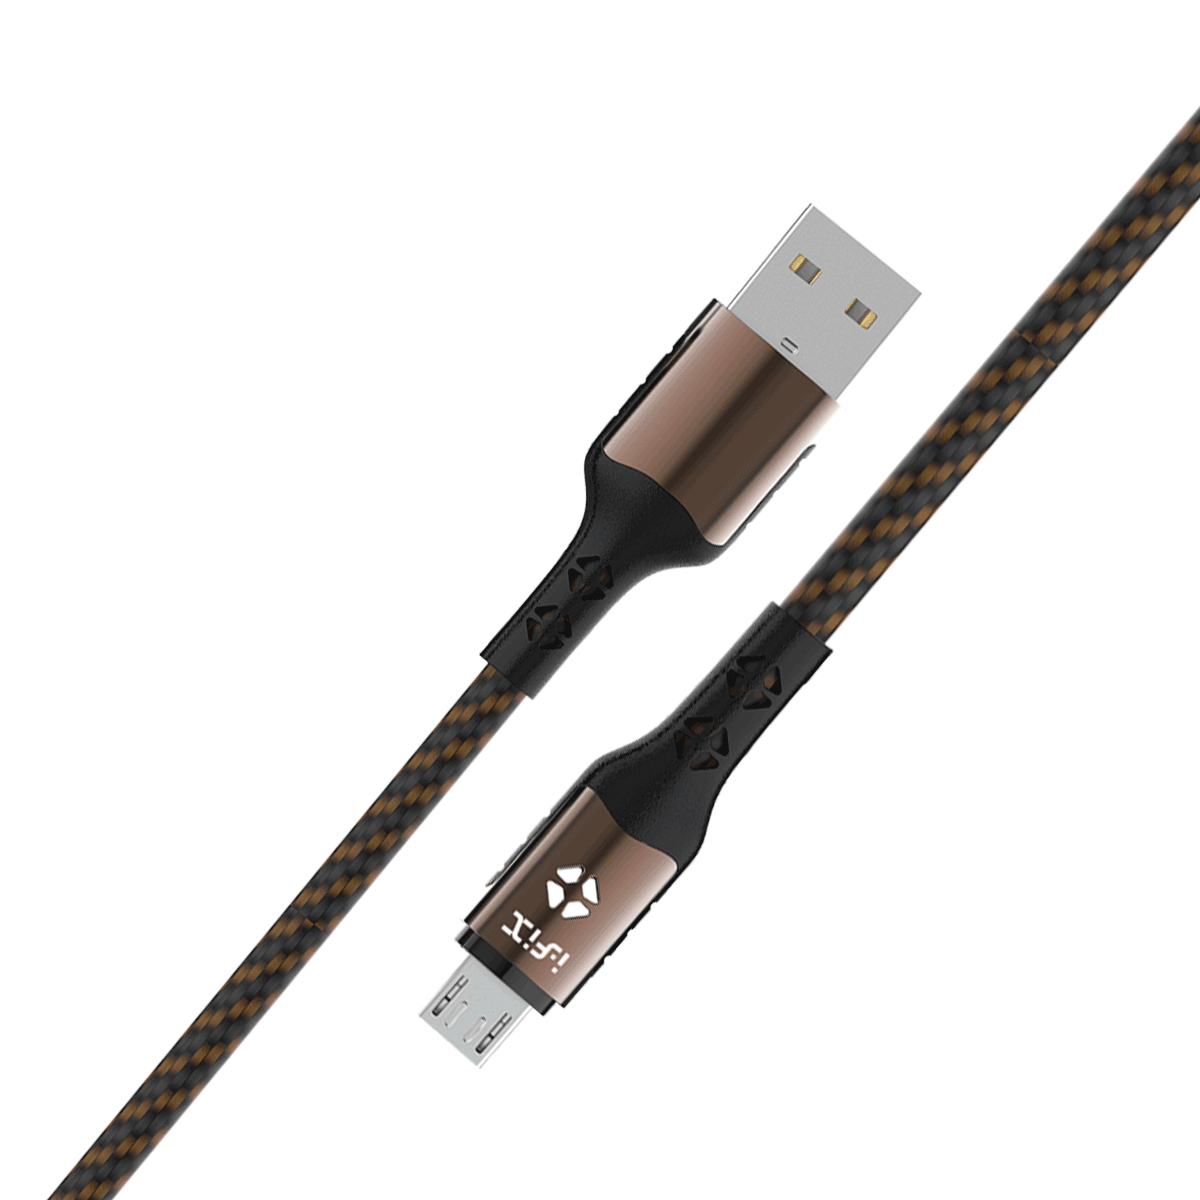 IF-10 Micro 5A Fast Charging USB Data Cable(Brown & Black)